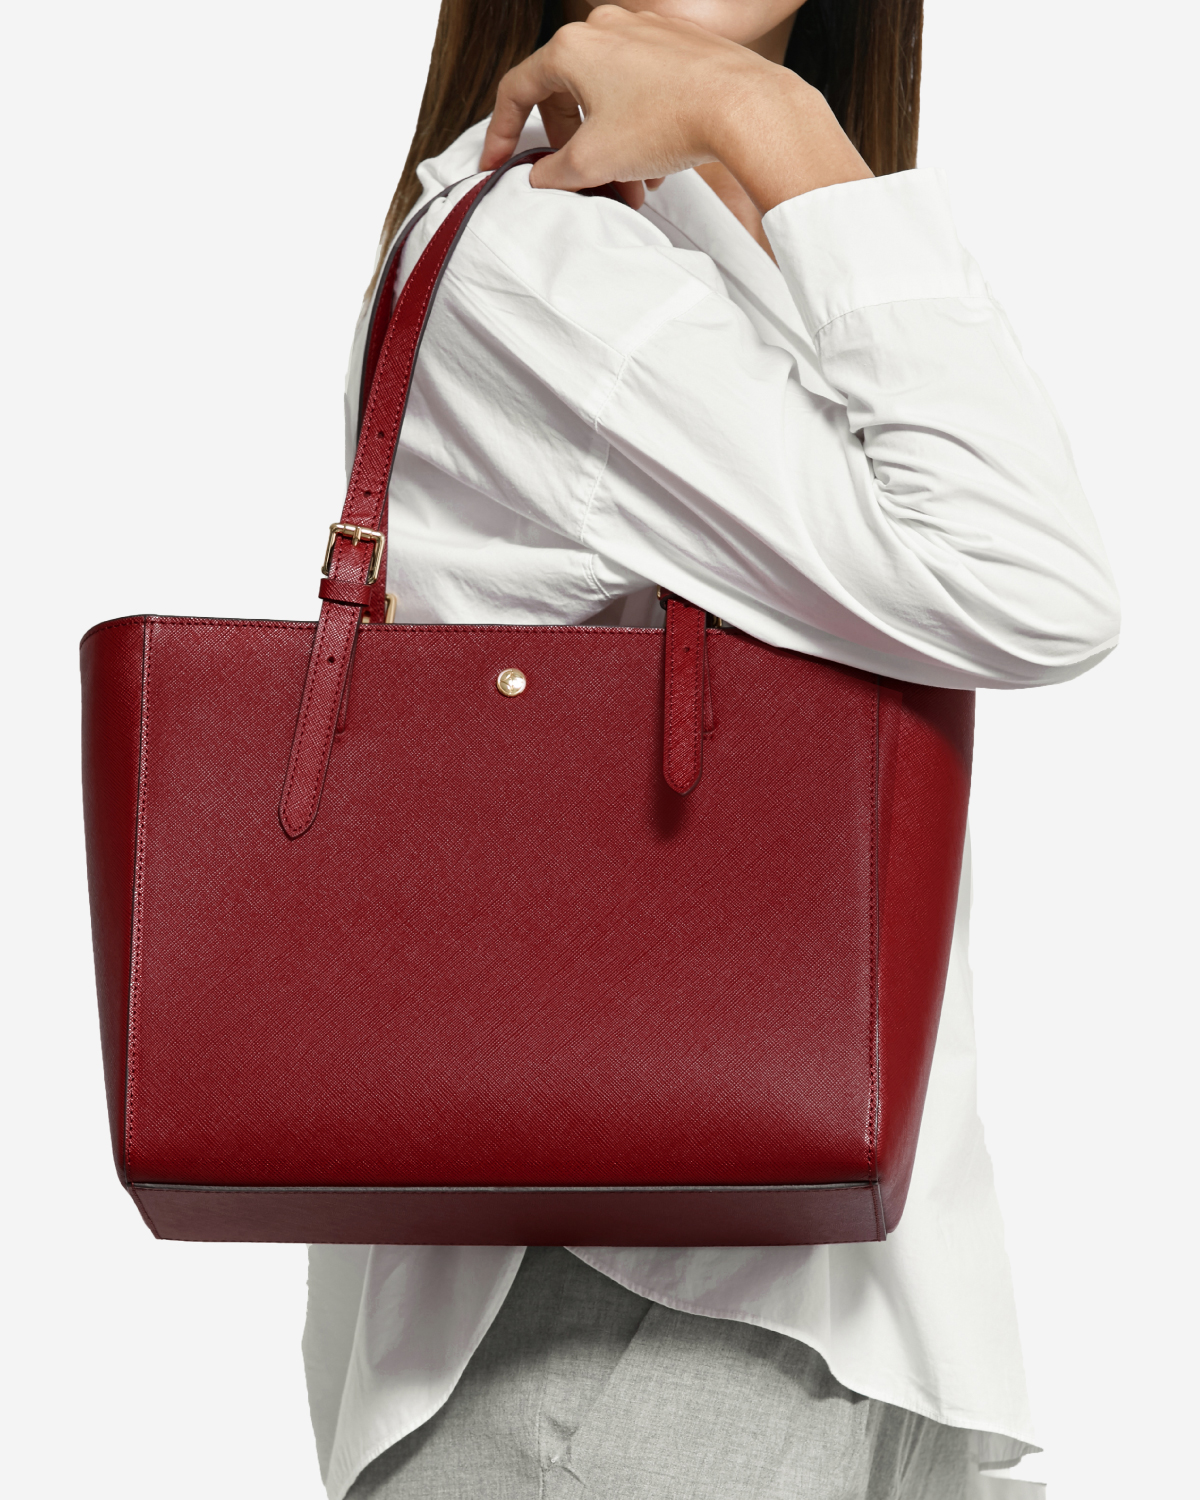 VERA The First Bag in Burgundy